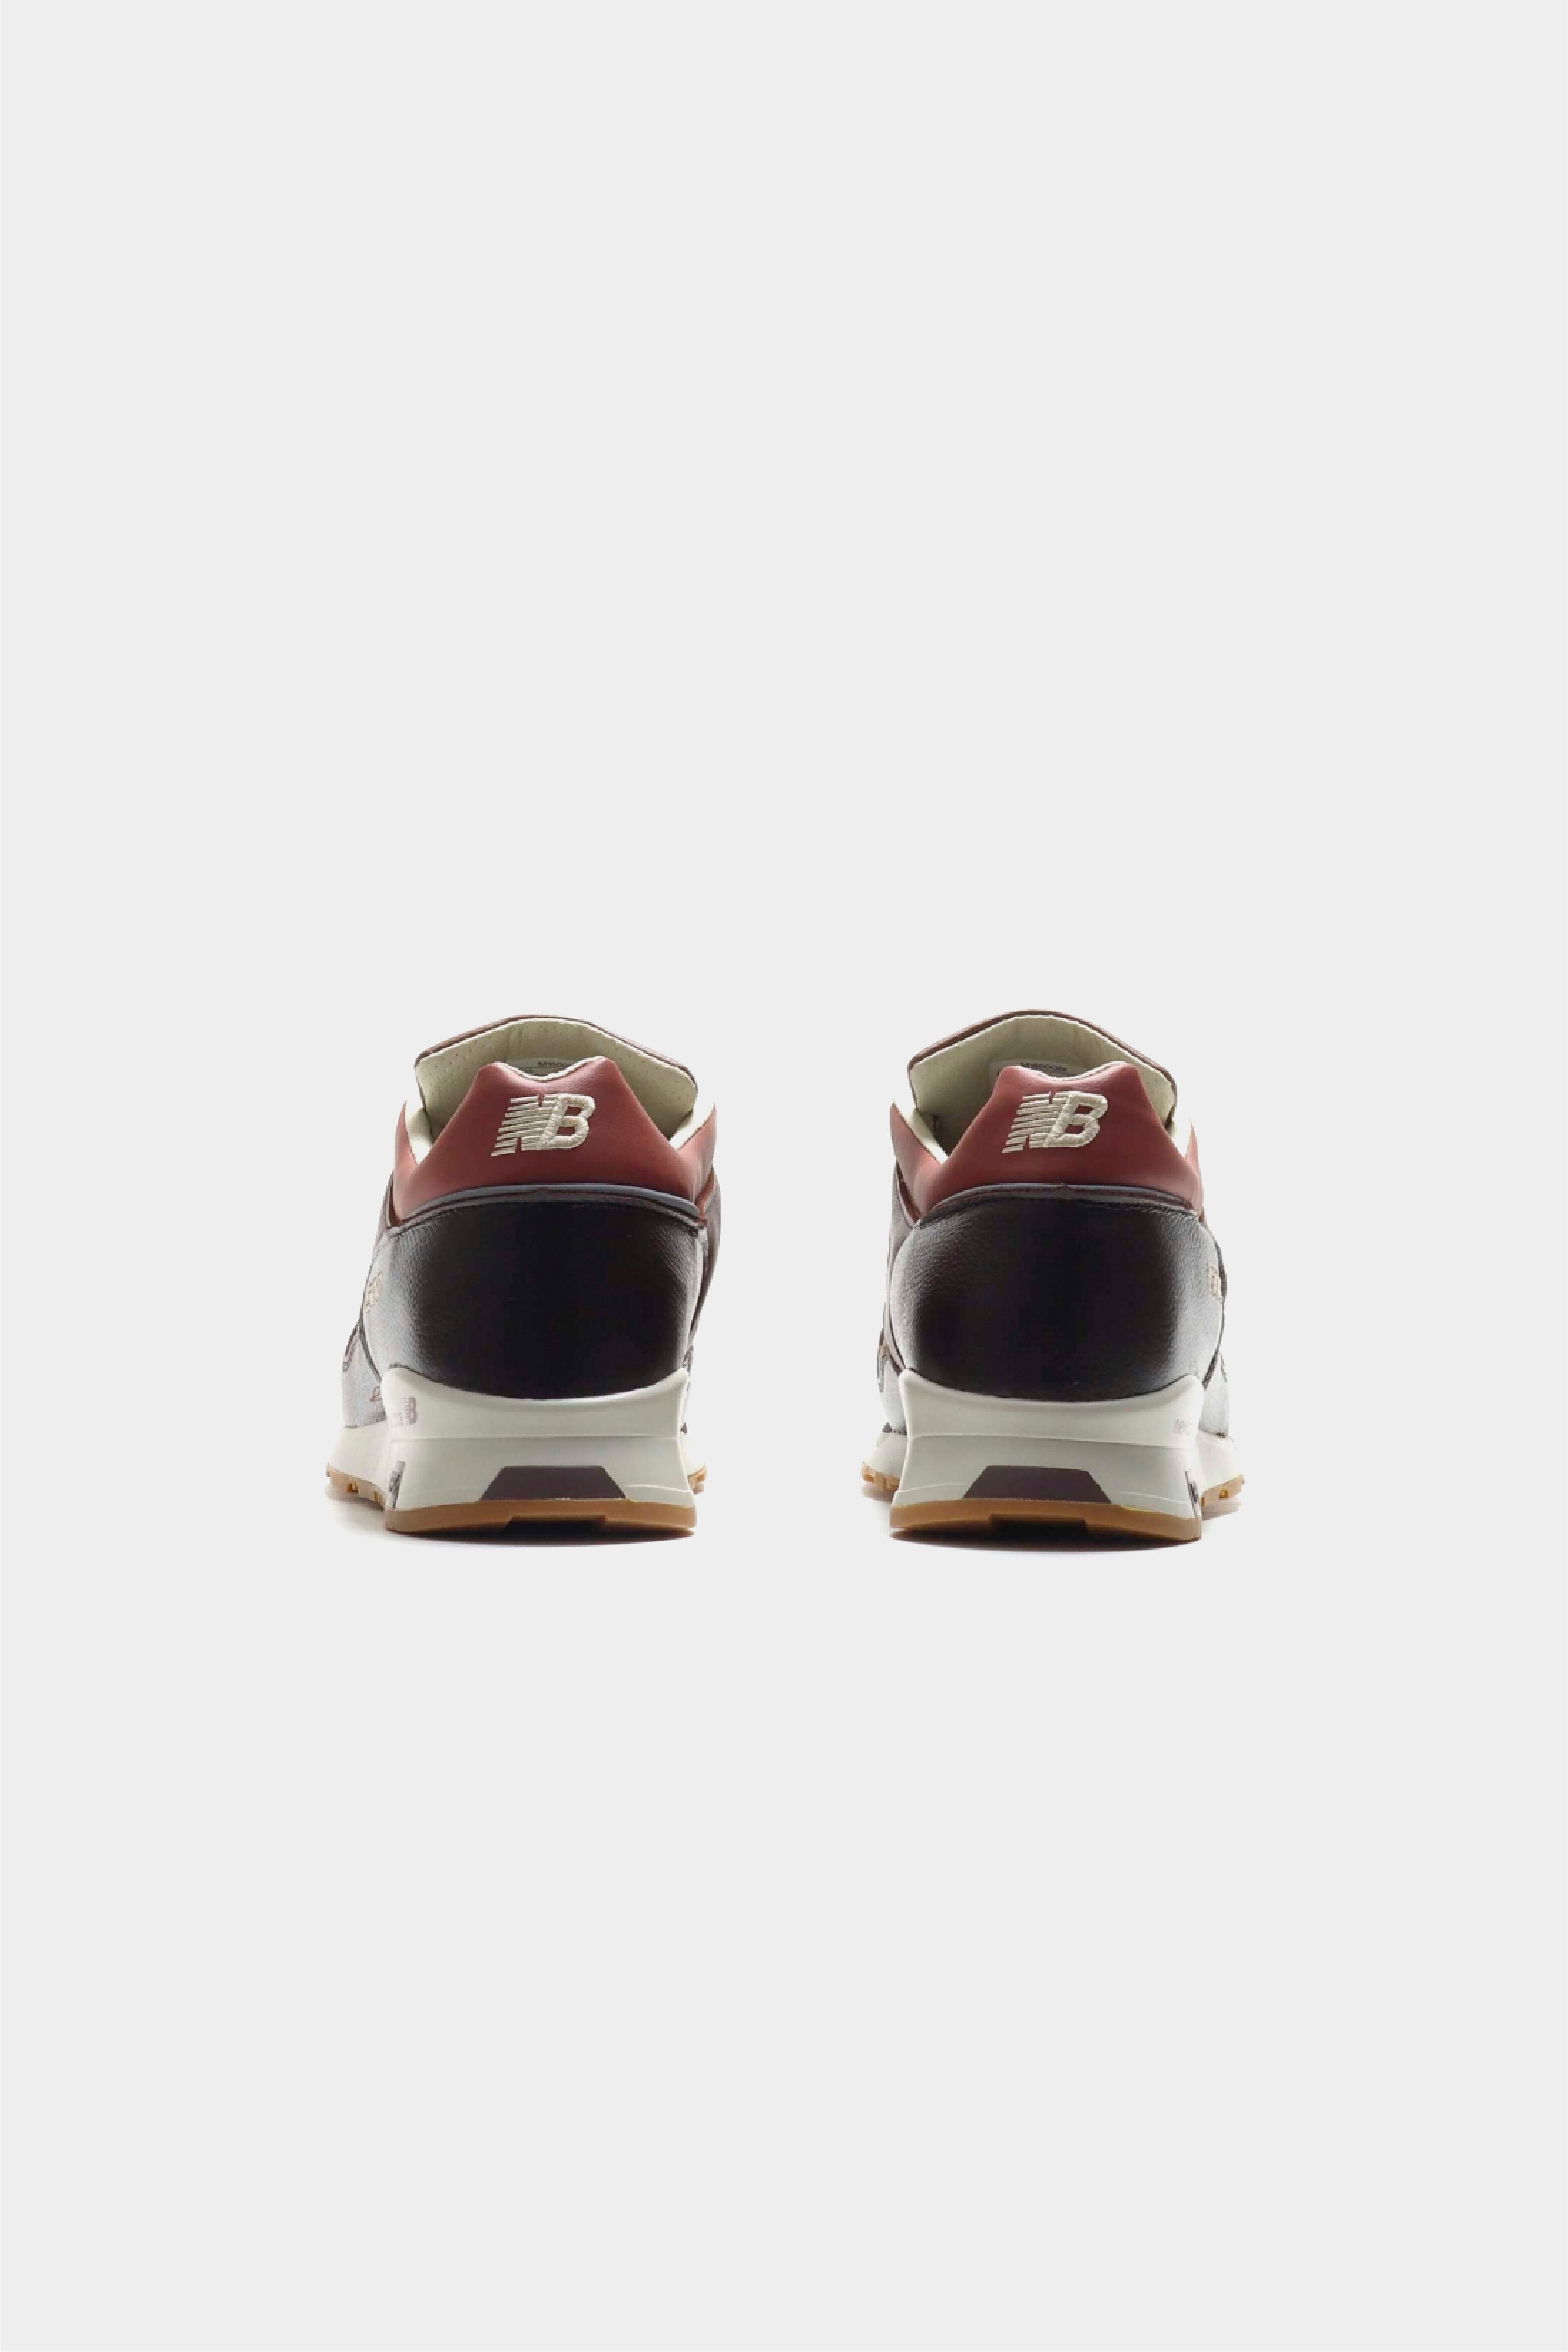 Selectshop FRAME - NEW BALANCE 1500 Made In UK "French Roast" Footwear Concept Store Dubai